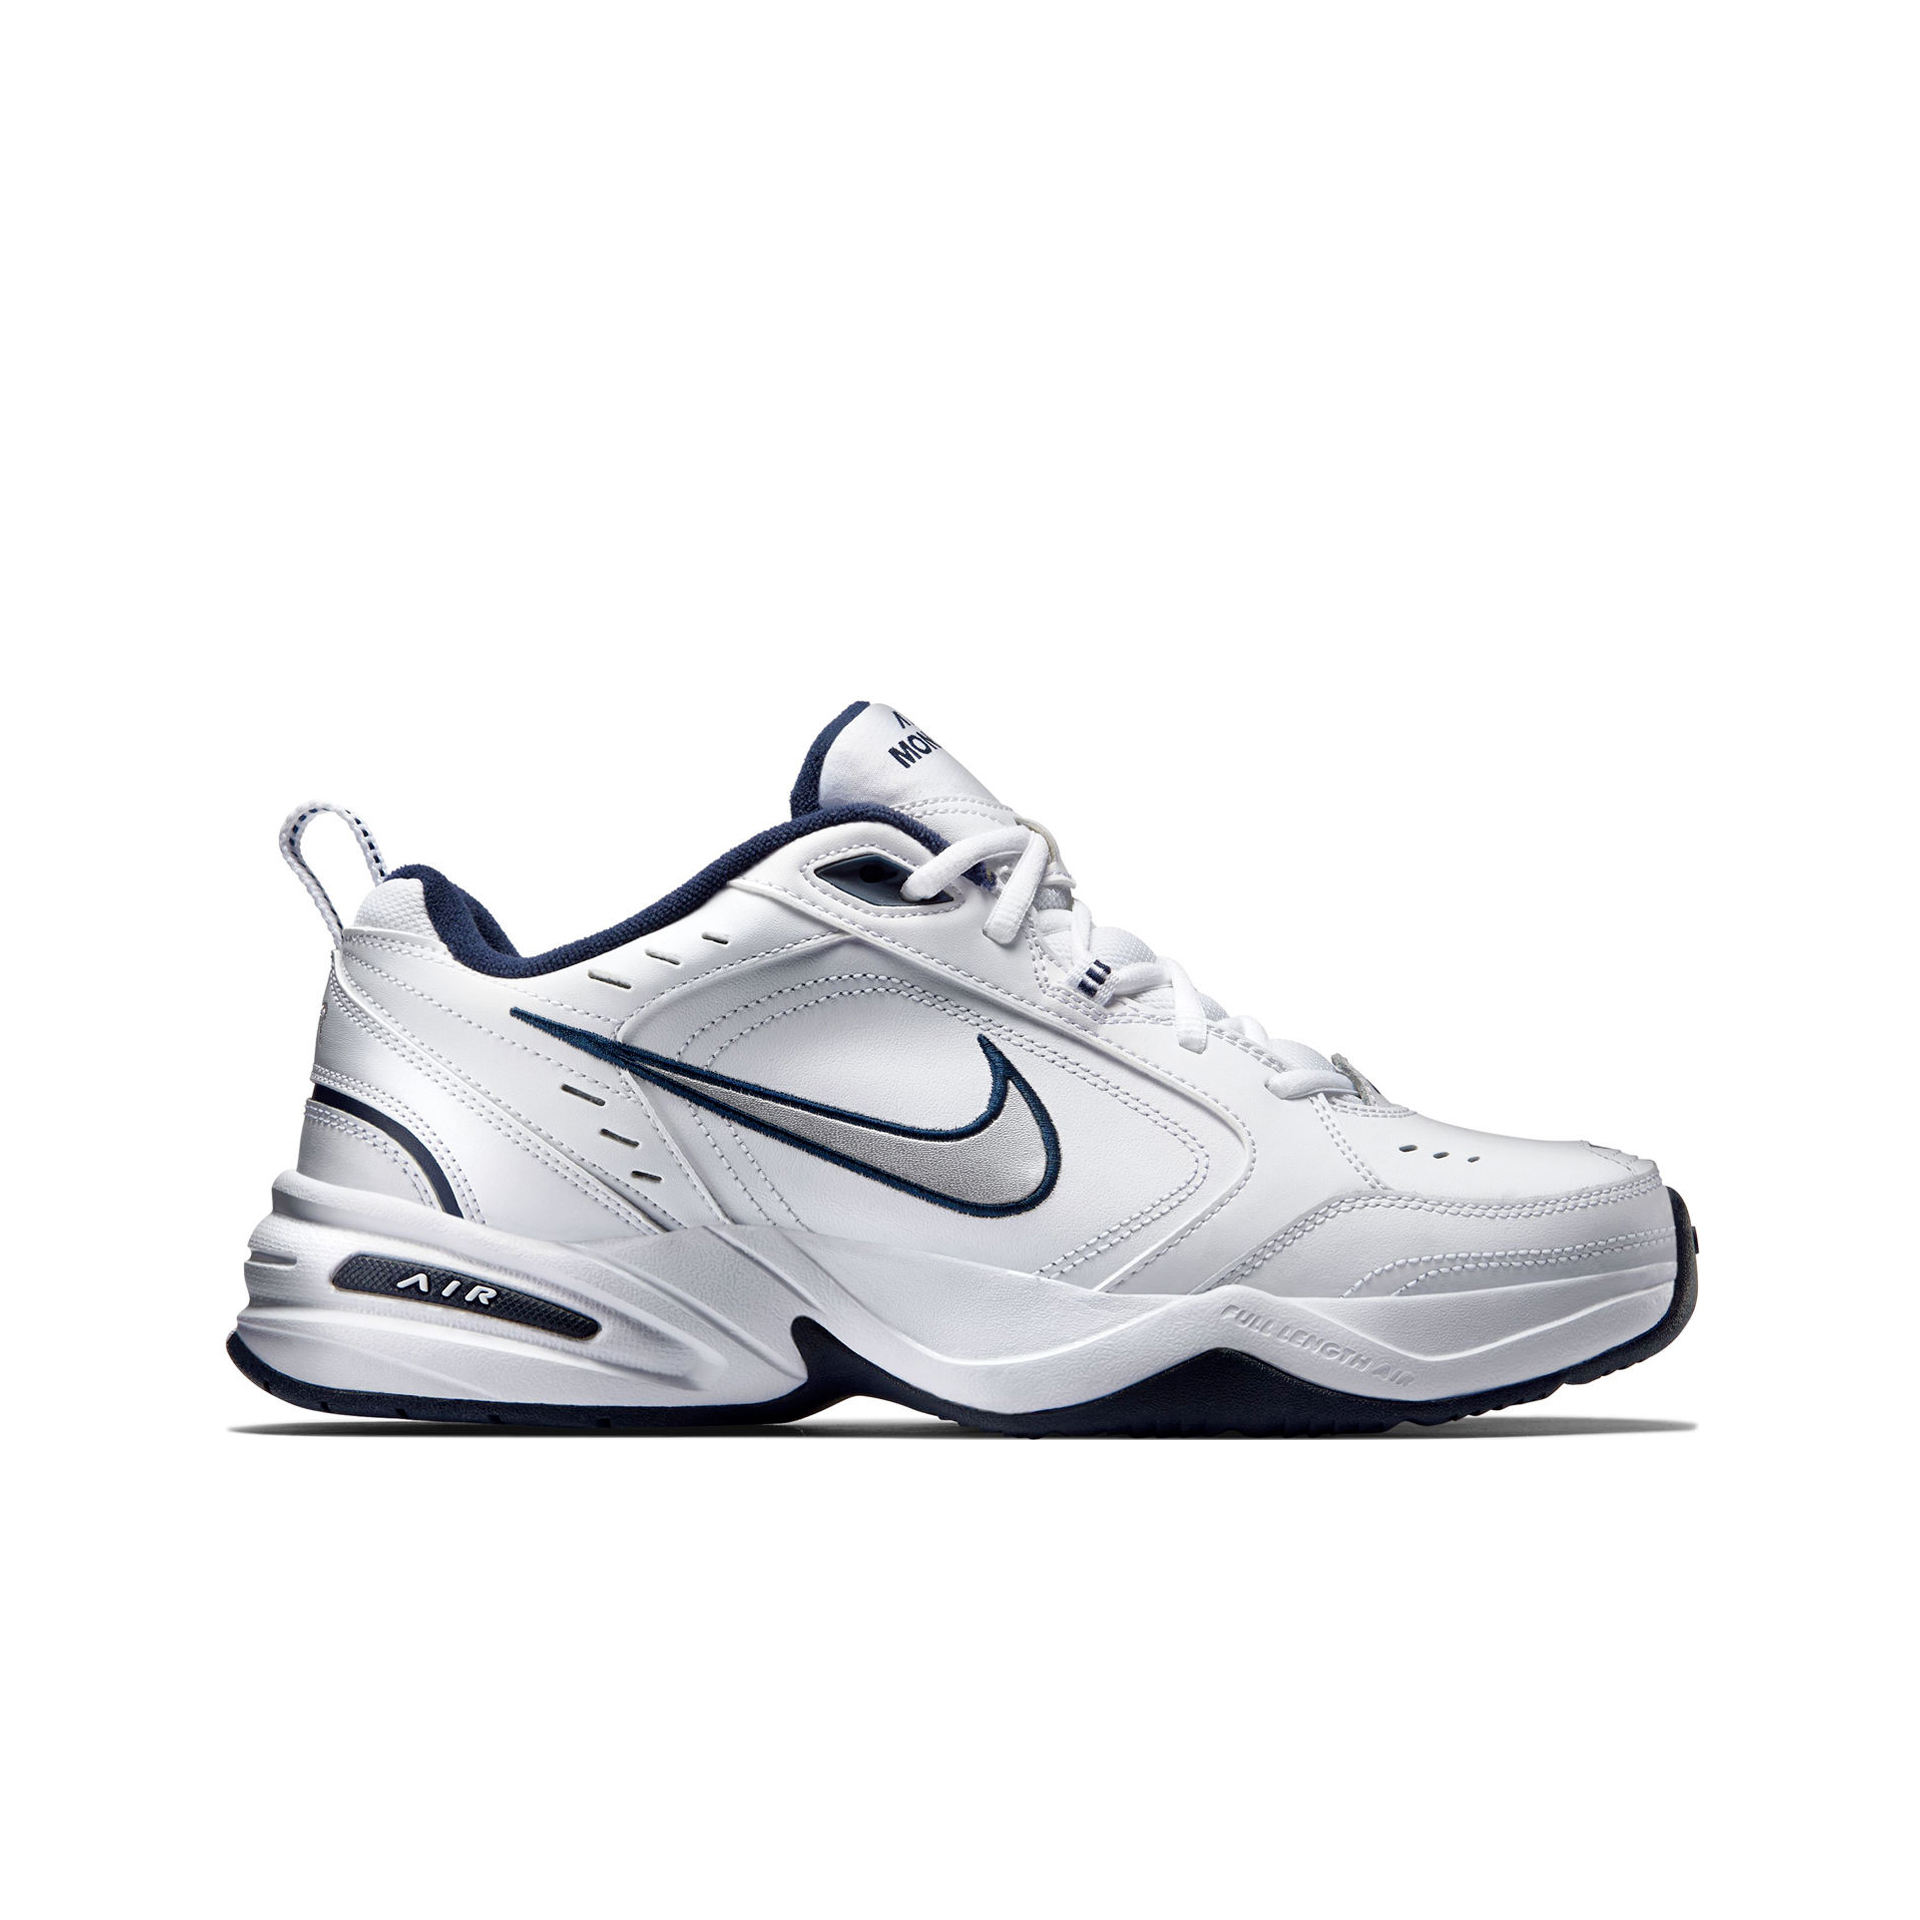 Nike Air Monarch Iv blanco hombre | Sneakers